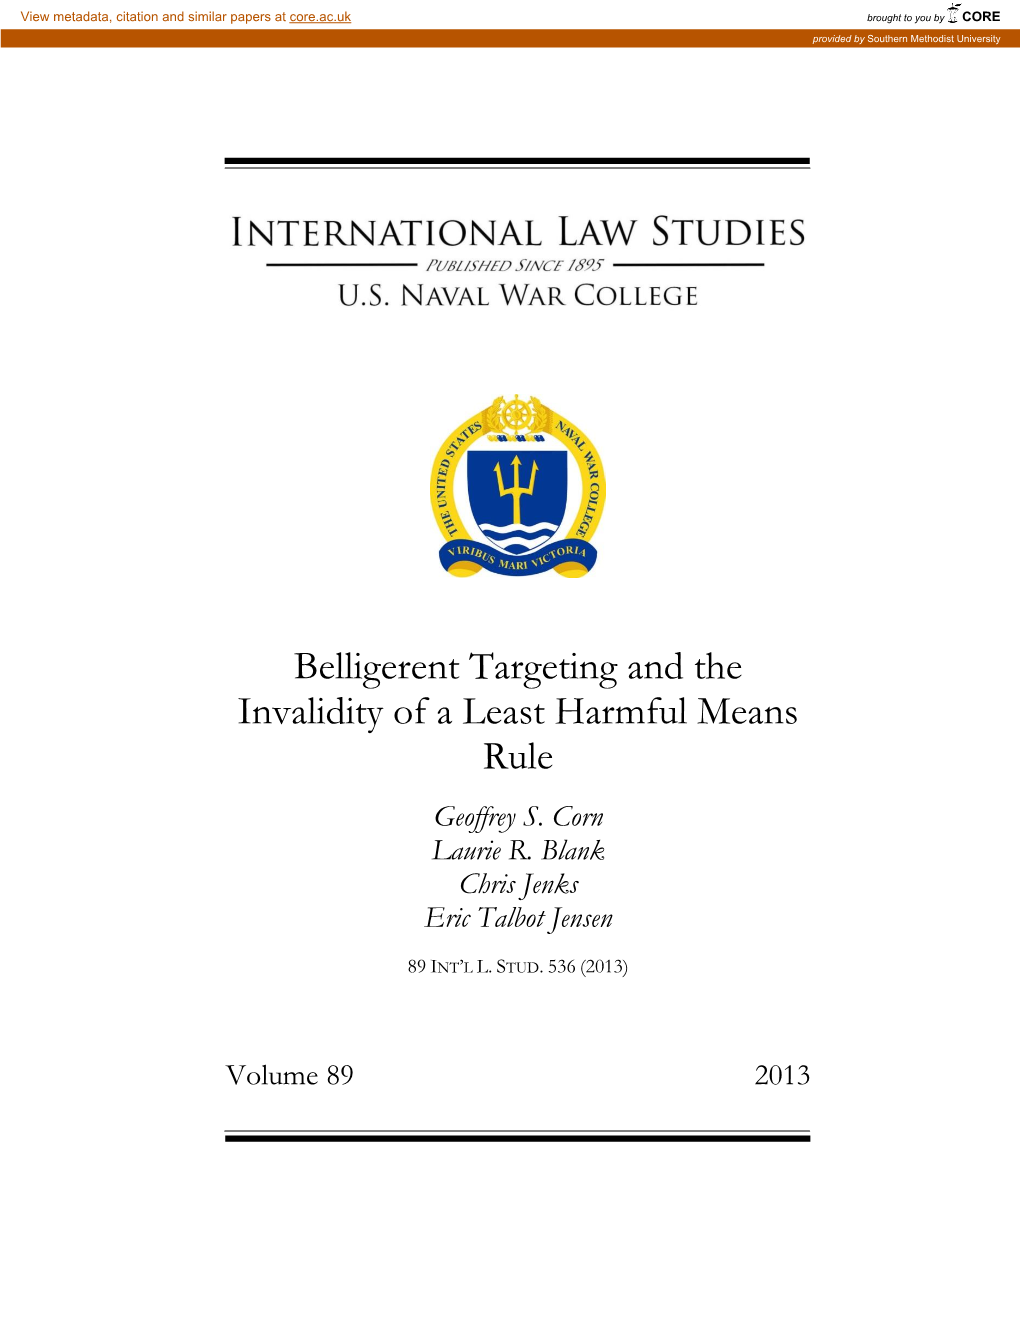 Belligerent Targeting and the Invalidity of a Least Harmful Means Rule